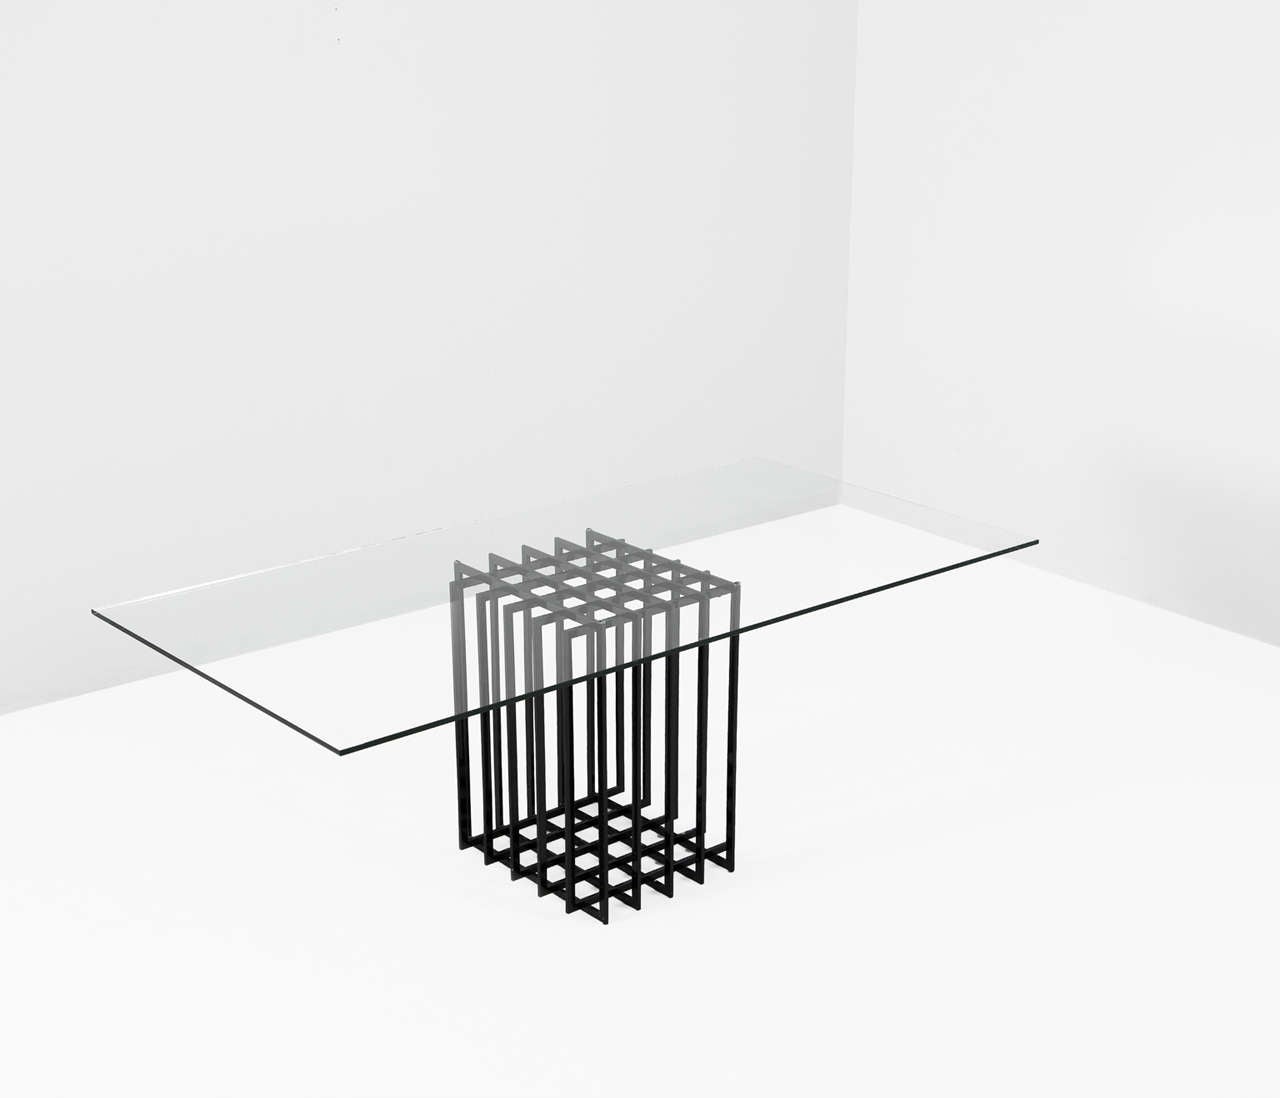 Table, in glass and metal, by Pierre Cardin, France, 1960s. 

Architectural writing or dining table by Pierre Cardin in black-coated steel. Due the use of a grid, the table features an elegant open expression. The clear glass top beautifully